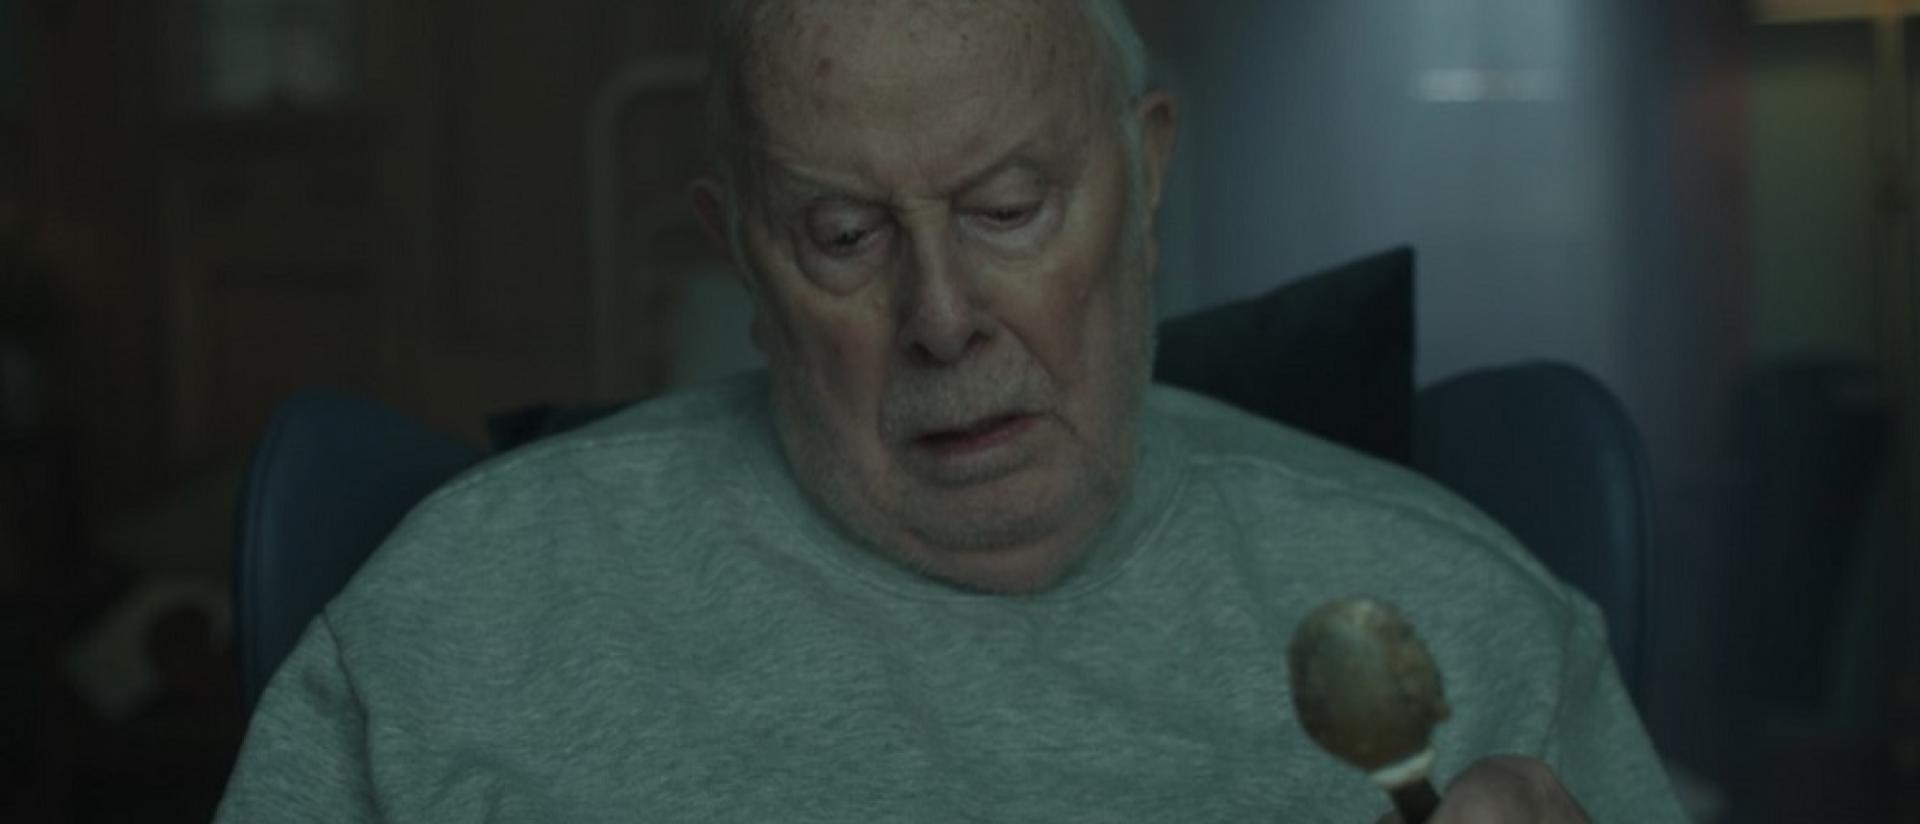 still from g flat featuring an elderly man sitting in a hospital chair, holding a spoon and looking down at a bowl of porridge.